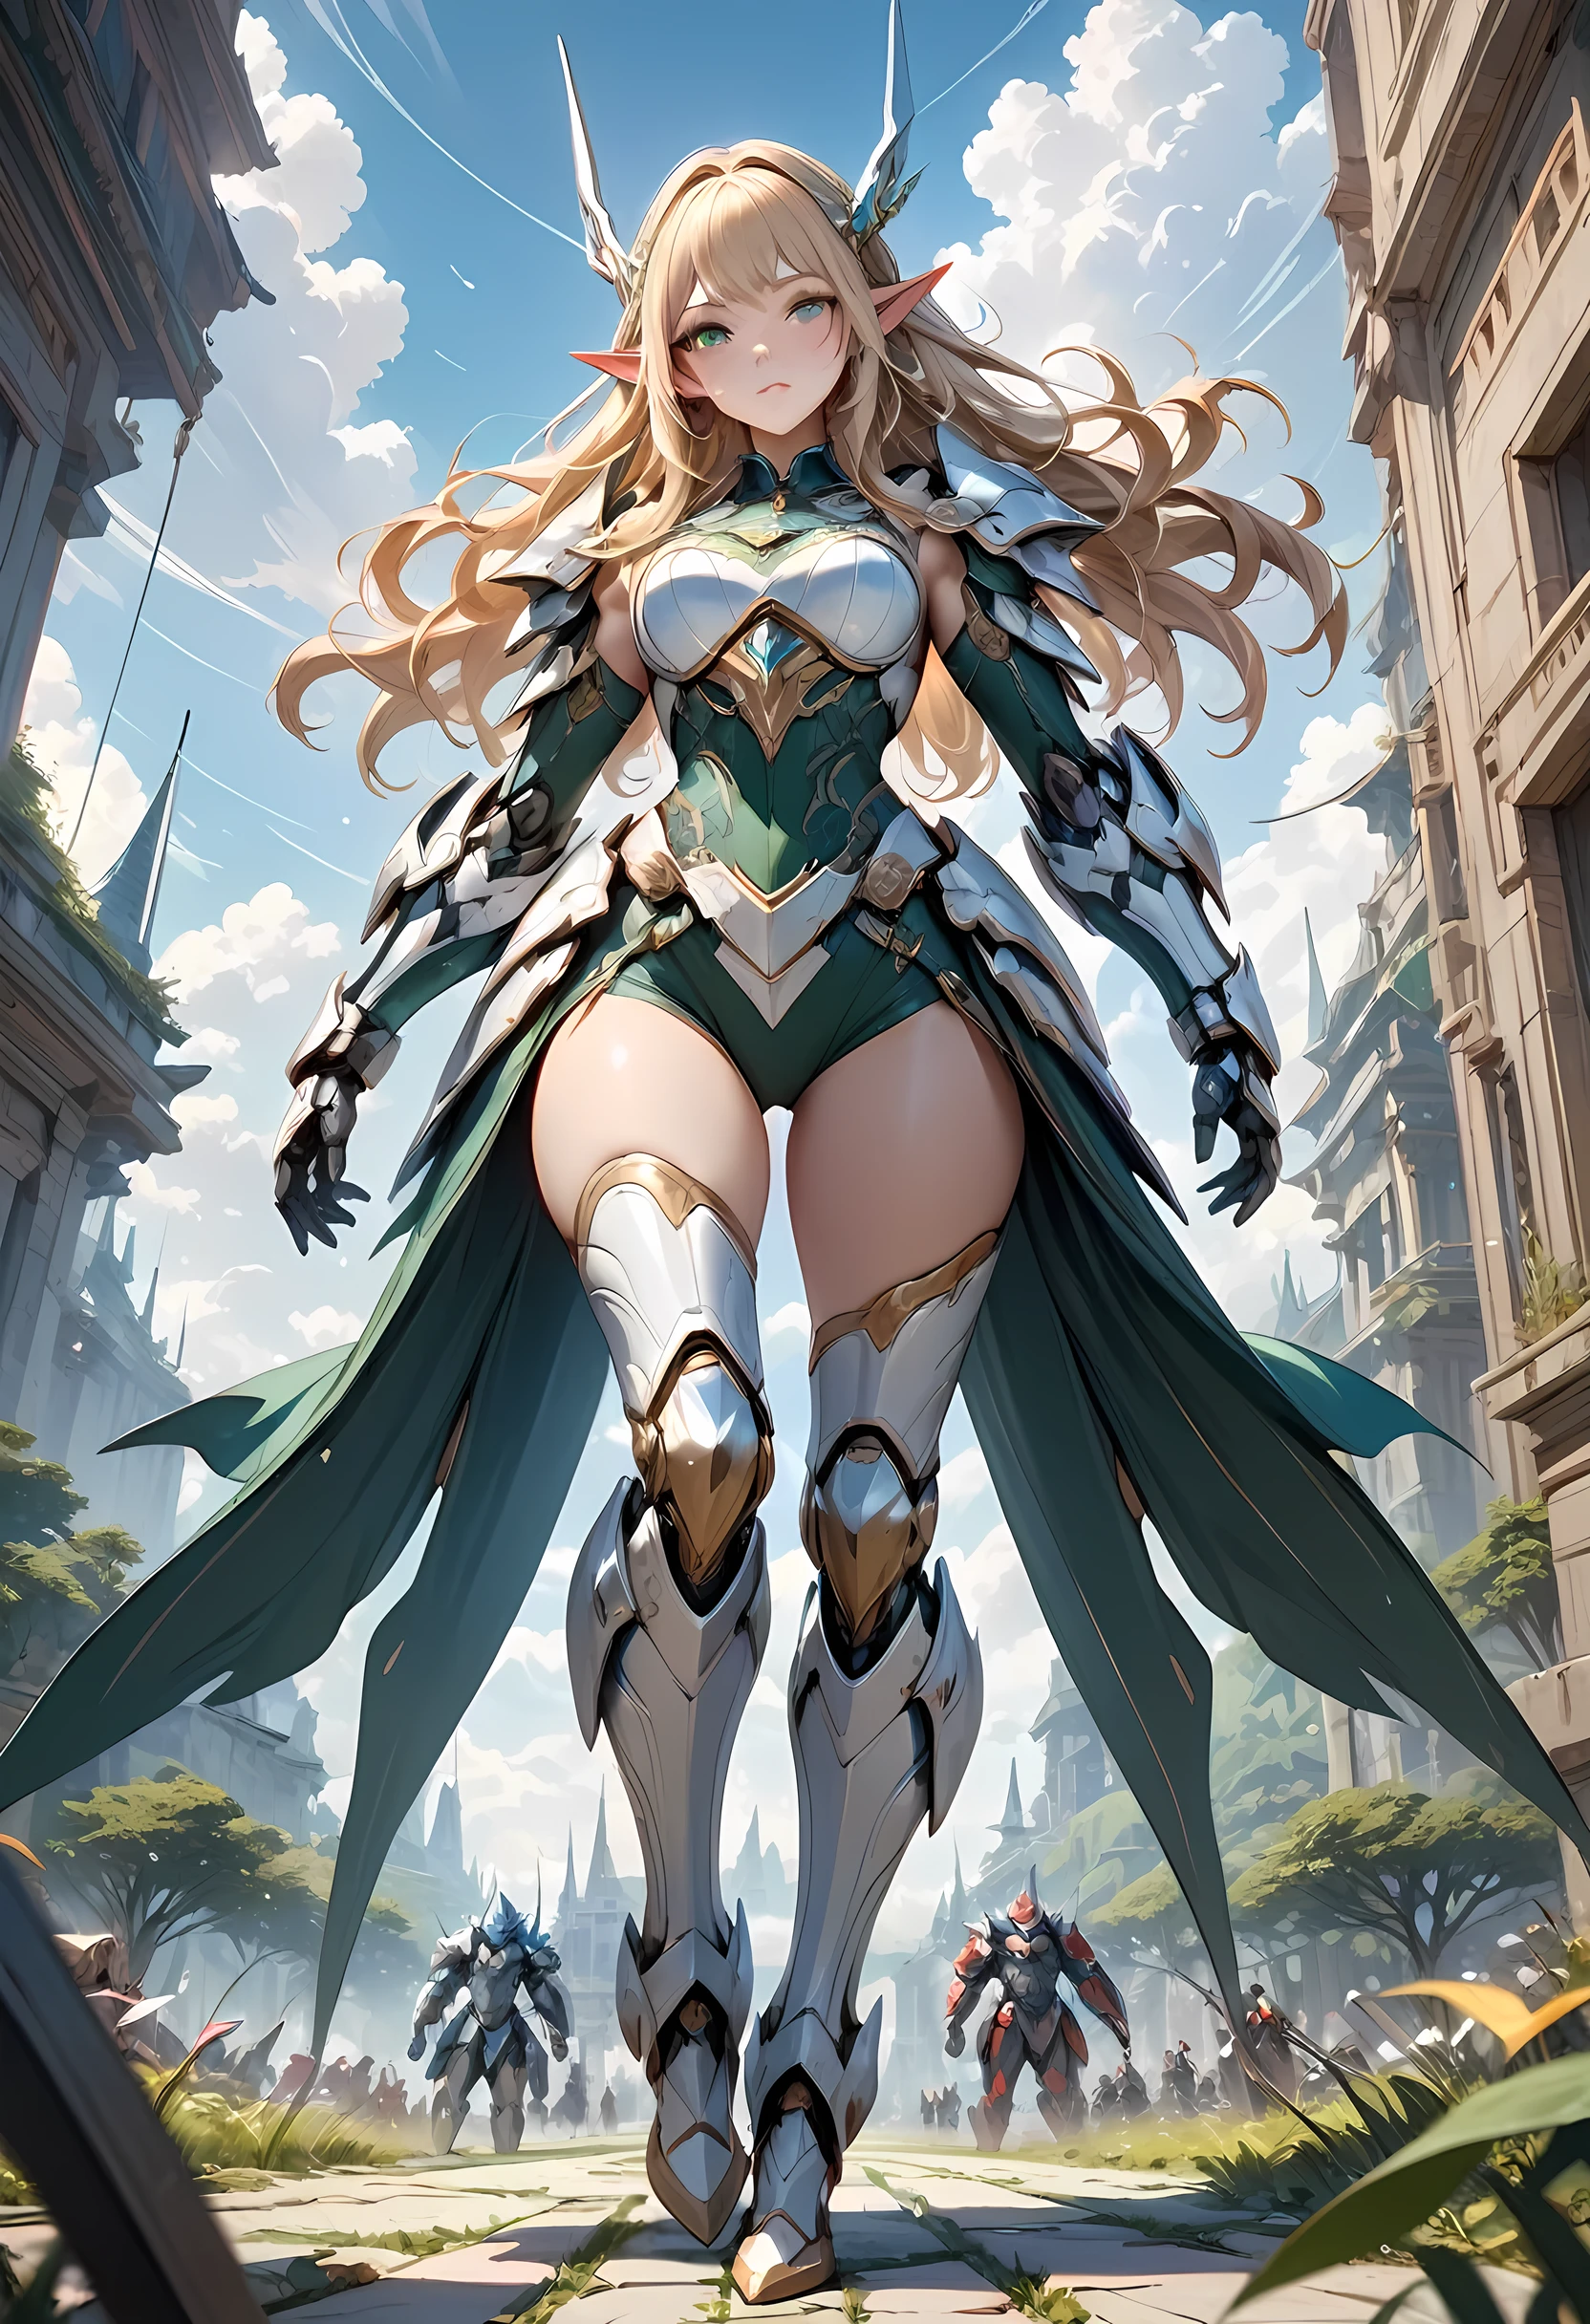 high details, best quality, 16k, [ultra detailed], masterpiece, best quality, (extremely detailed), full body, ultra wide shot, photorealistic, , fantasy art, dnd art, rpg art, realistic art, a wide angle, (((anatomically correct))) a wallpaper of an elf knight, elf warrior, princess knight, shinning knight, ready for battle with her mount (intense details, Masterpiece, best quality: 1.5), female elf (intense details, Masterpiece, best quality: 1.5), ultra detailed face, ultra feminine, fair skin, exquisite beauty, gold hair, long hair, wavy hair, small pointed ears, dynamic eyes color, wearing heavy mech armor, shinning metal, armed with elven sword, green meadows, blue skies background and some clouds background depth of field (intricate details, Masterpiece, best quality: 1.5), full body (intricate details, Masterpiece, best quality: 1.5), high details, best quality, highres, ultra wide angle, cybrk